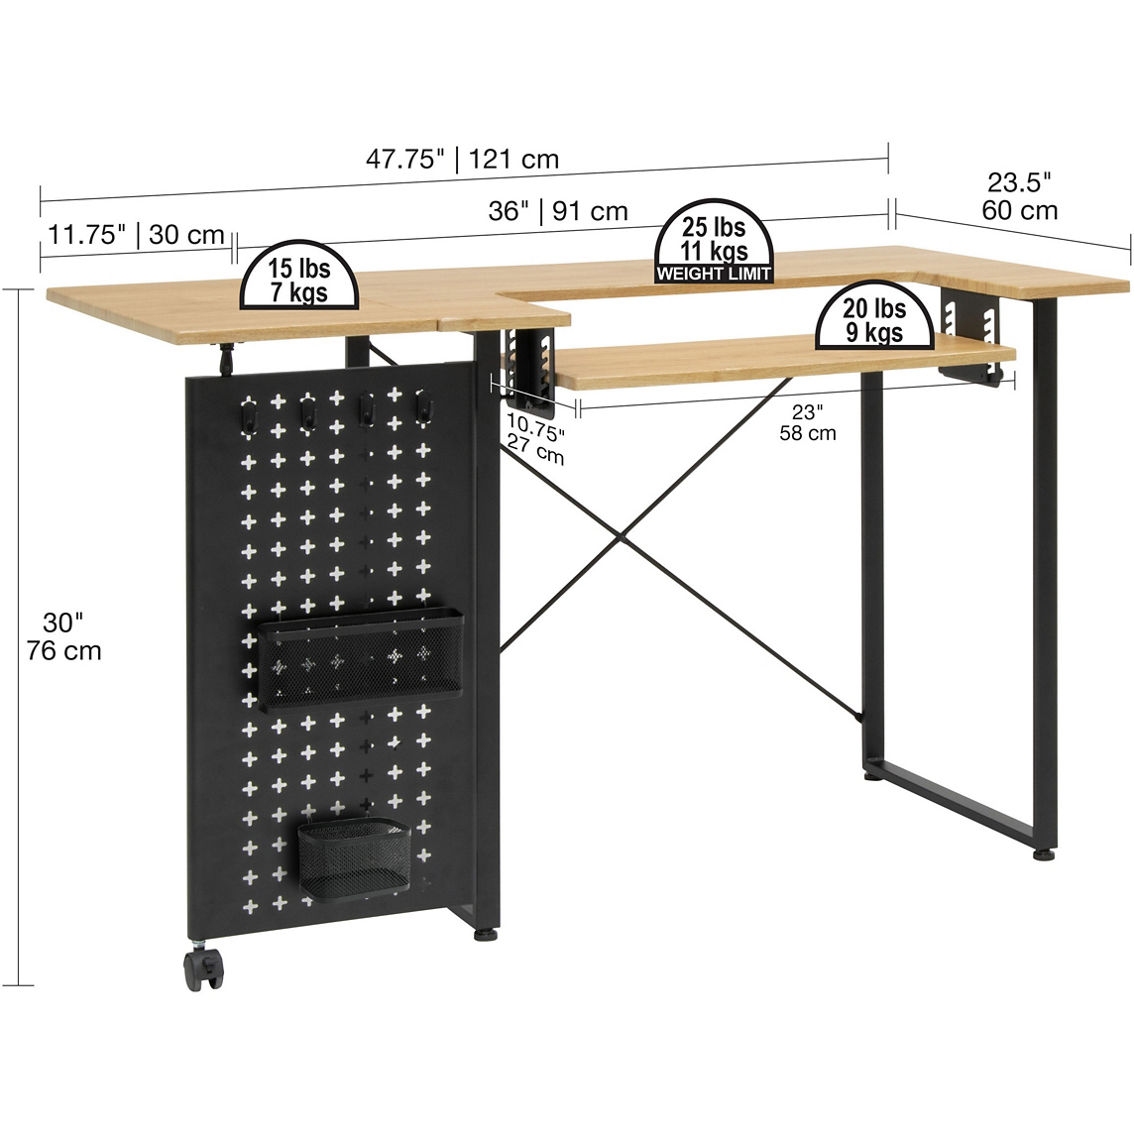 Studio Designs Pivot Sewing Table with Swingout Storage Panel - Image 10 of 10